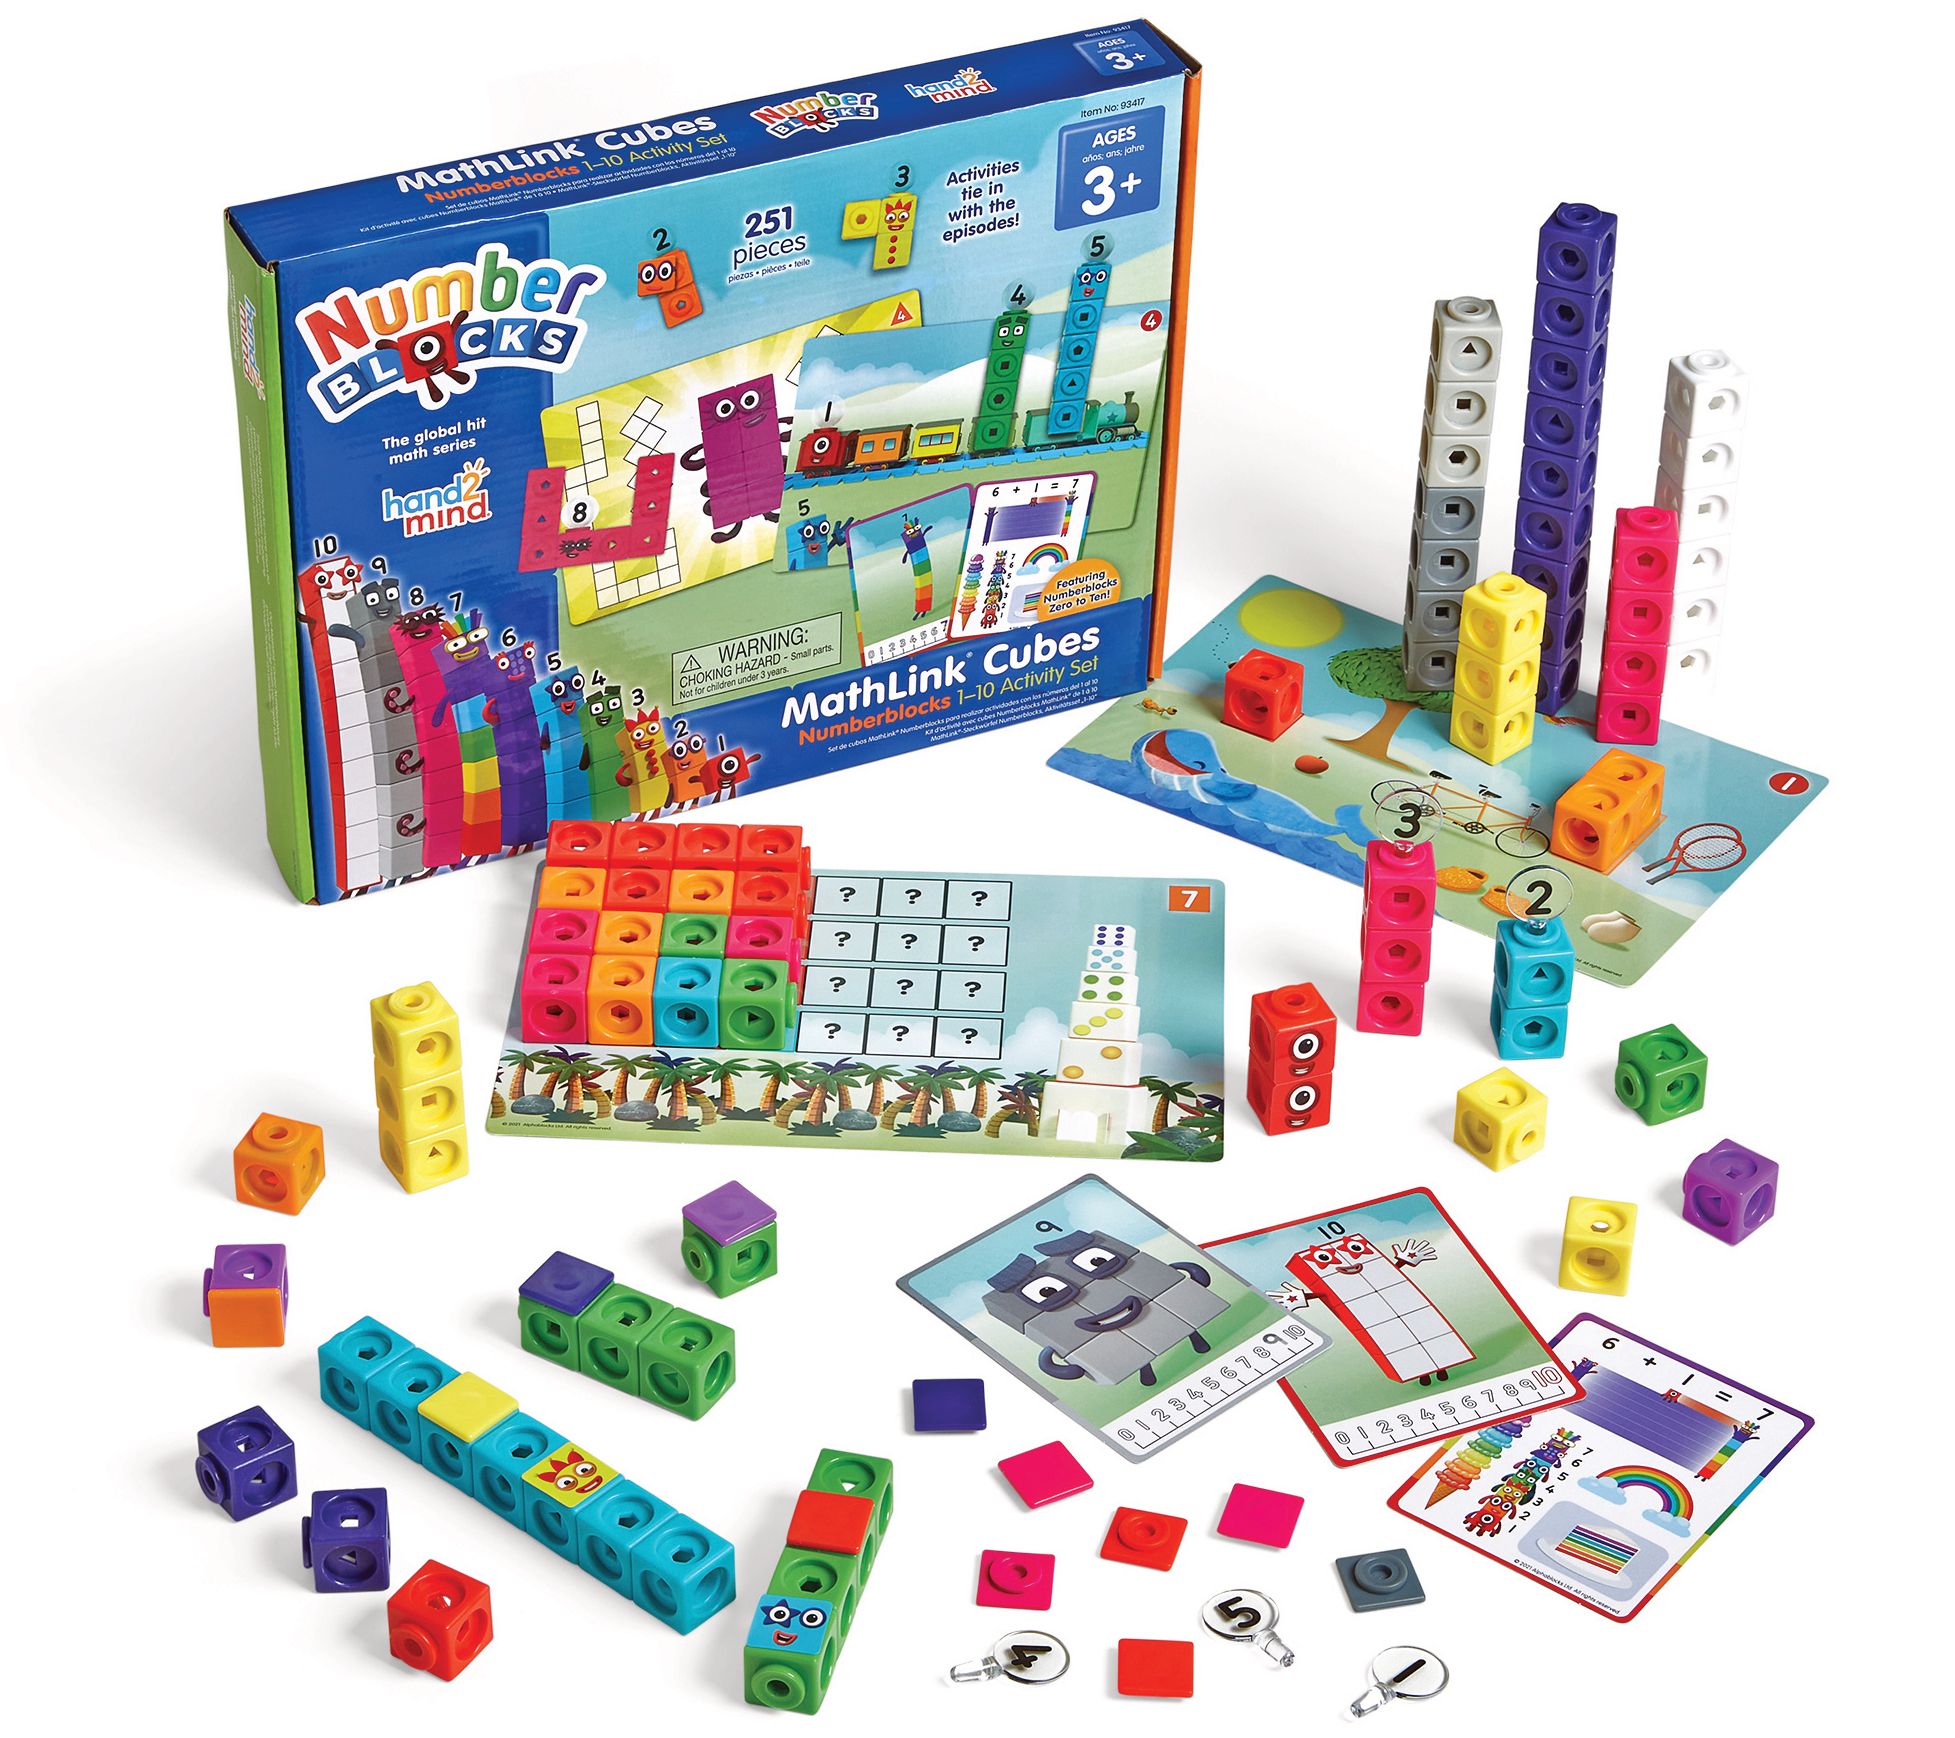 hand2mind Numberblocks 0-10 Activity Set with M athLink Cubes 